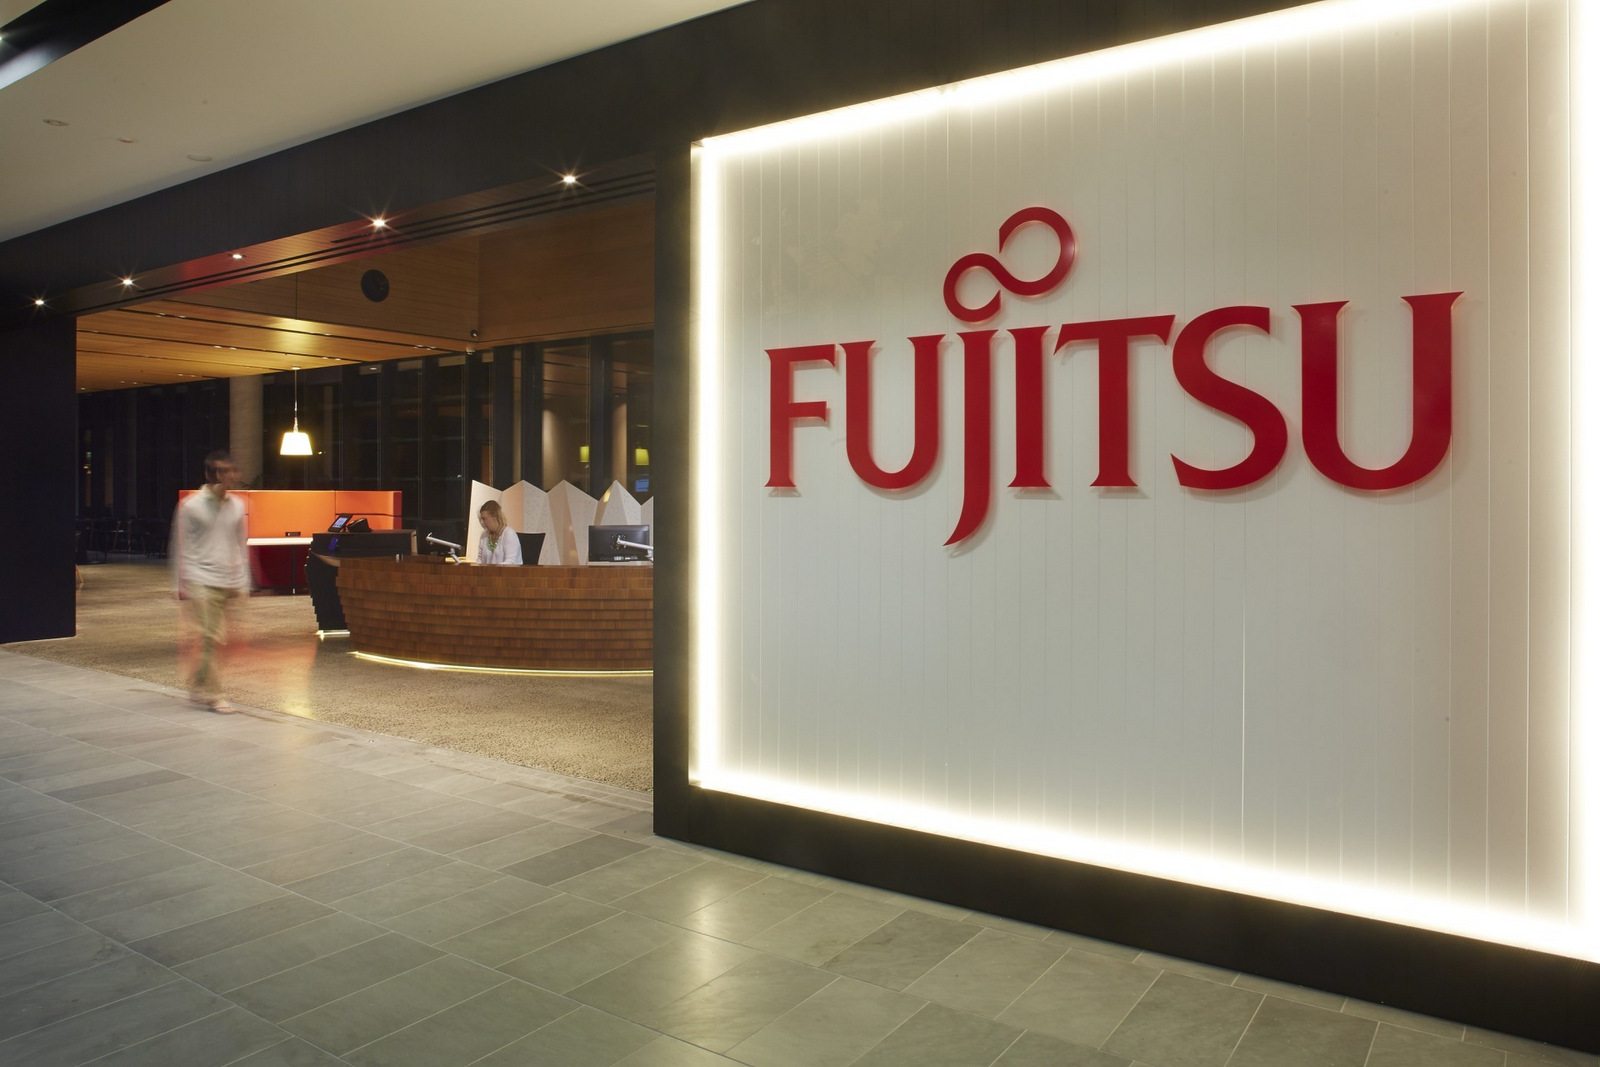 Fujitsu launches 5G vRAN to help reduce CO2 emissions